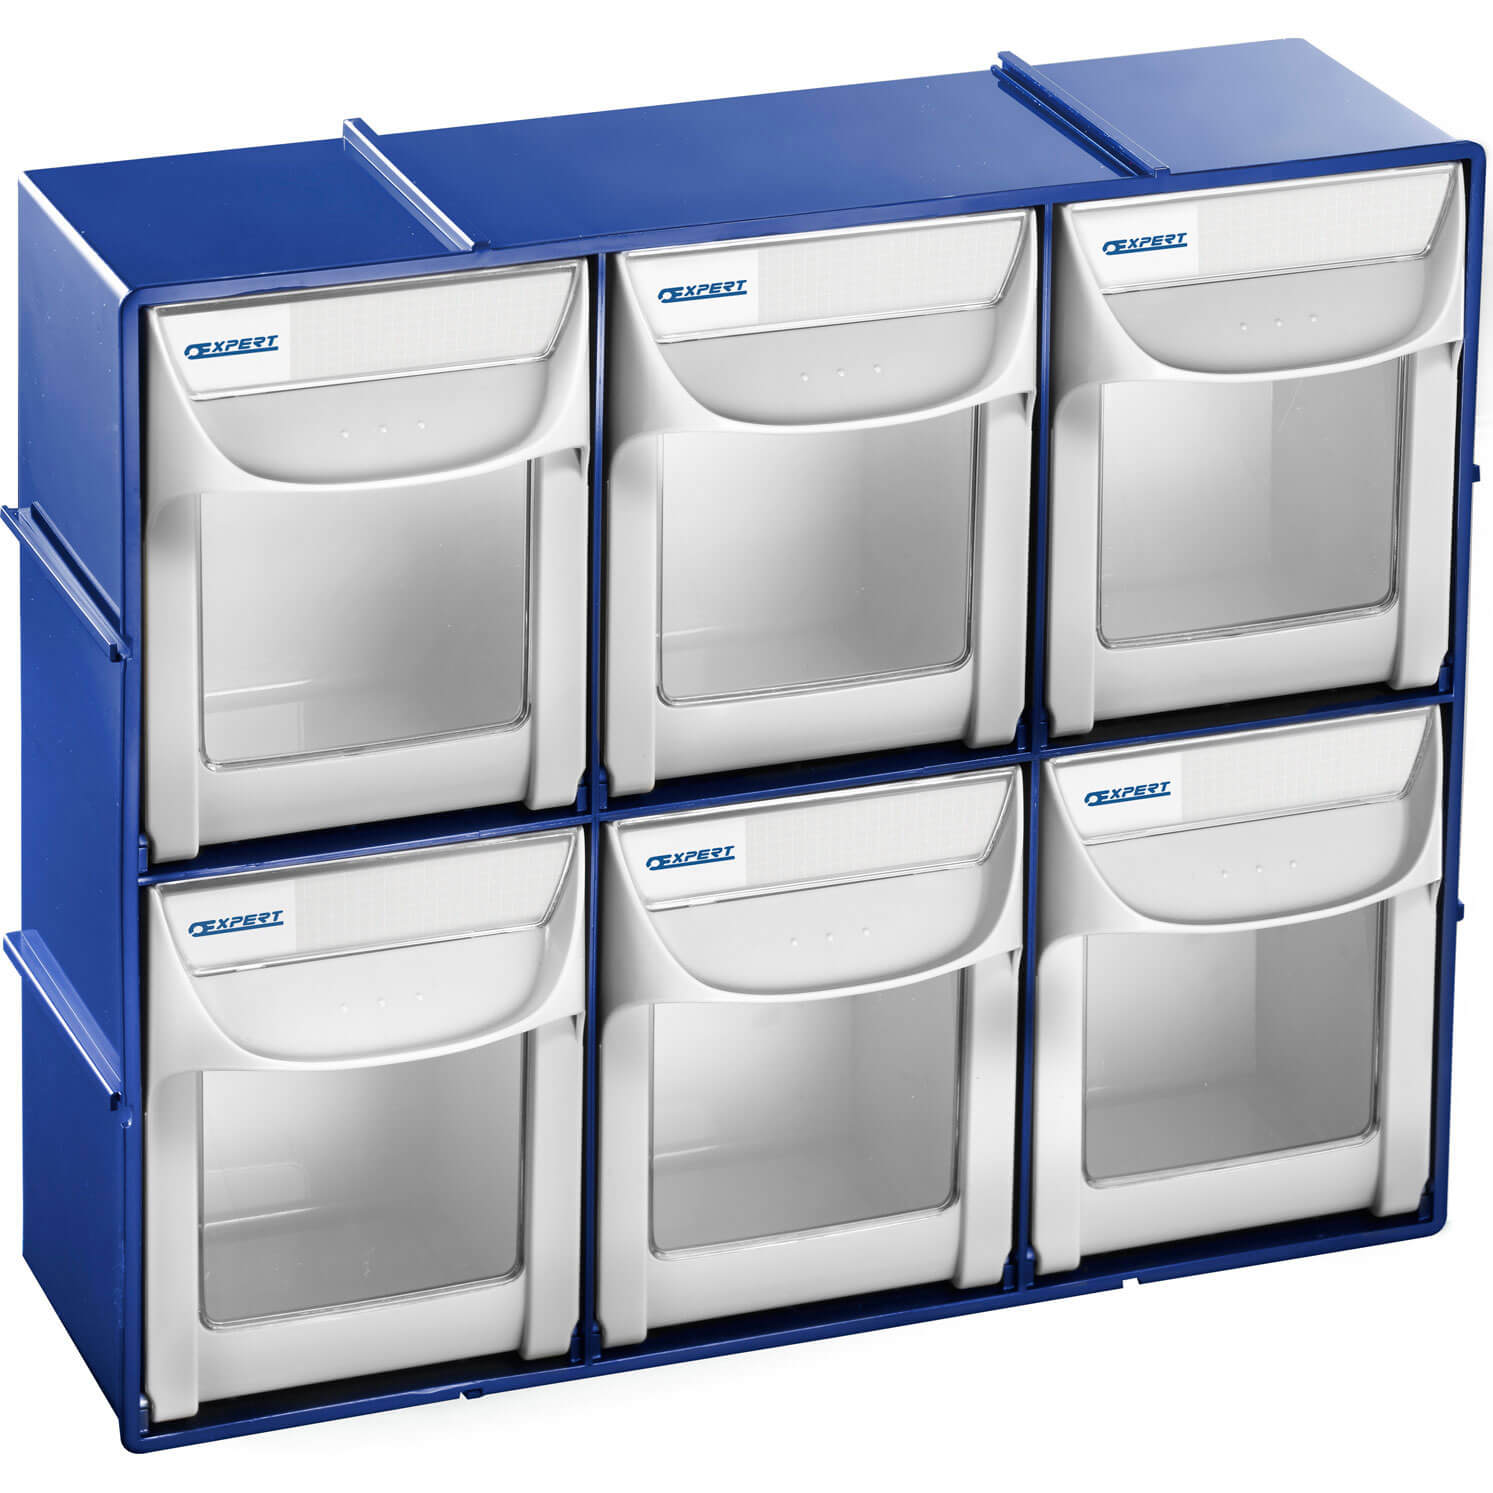 Britool Expert Quick Tip Out Storage Bins for Walls & Work Tops